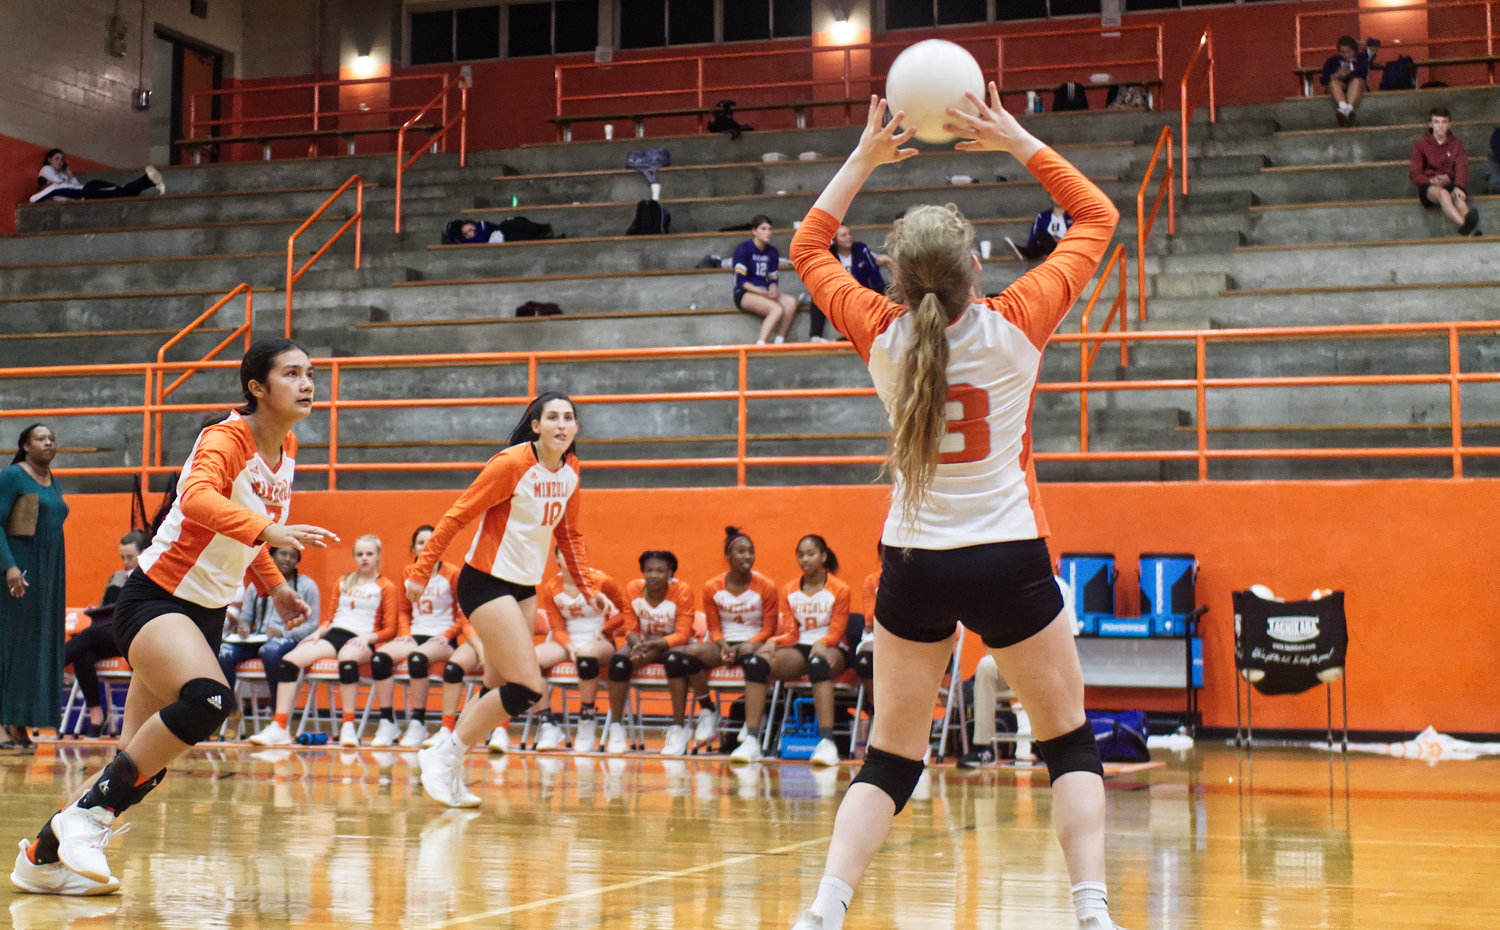 Mylee Fischer (3, right) sets the ball, and Valerie Garcia and Britney Pickle prepare to go in for the kill.